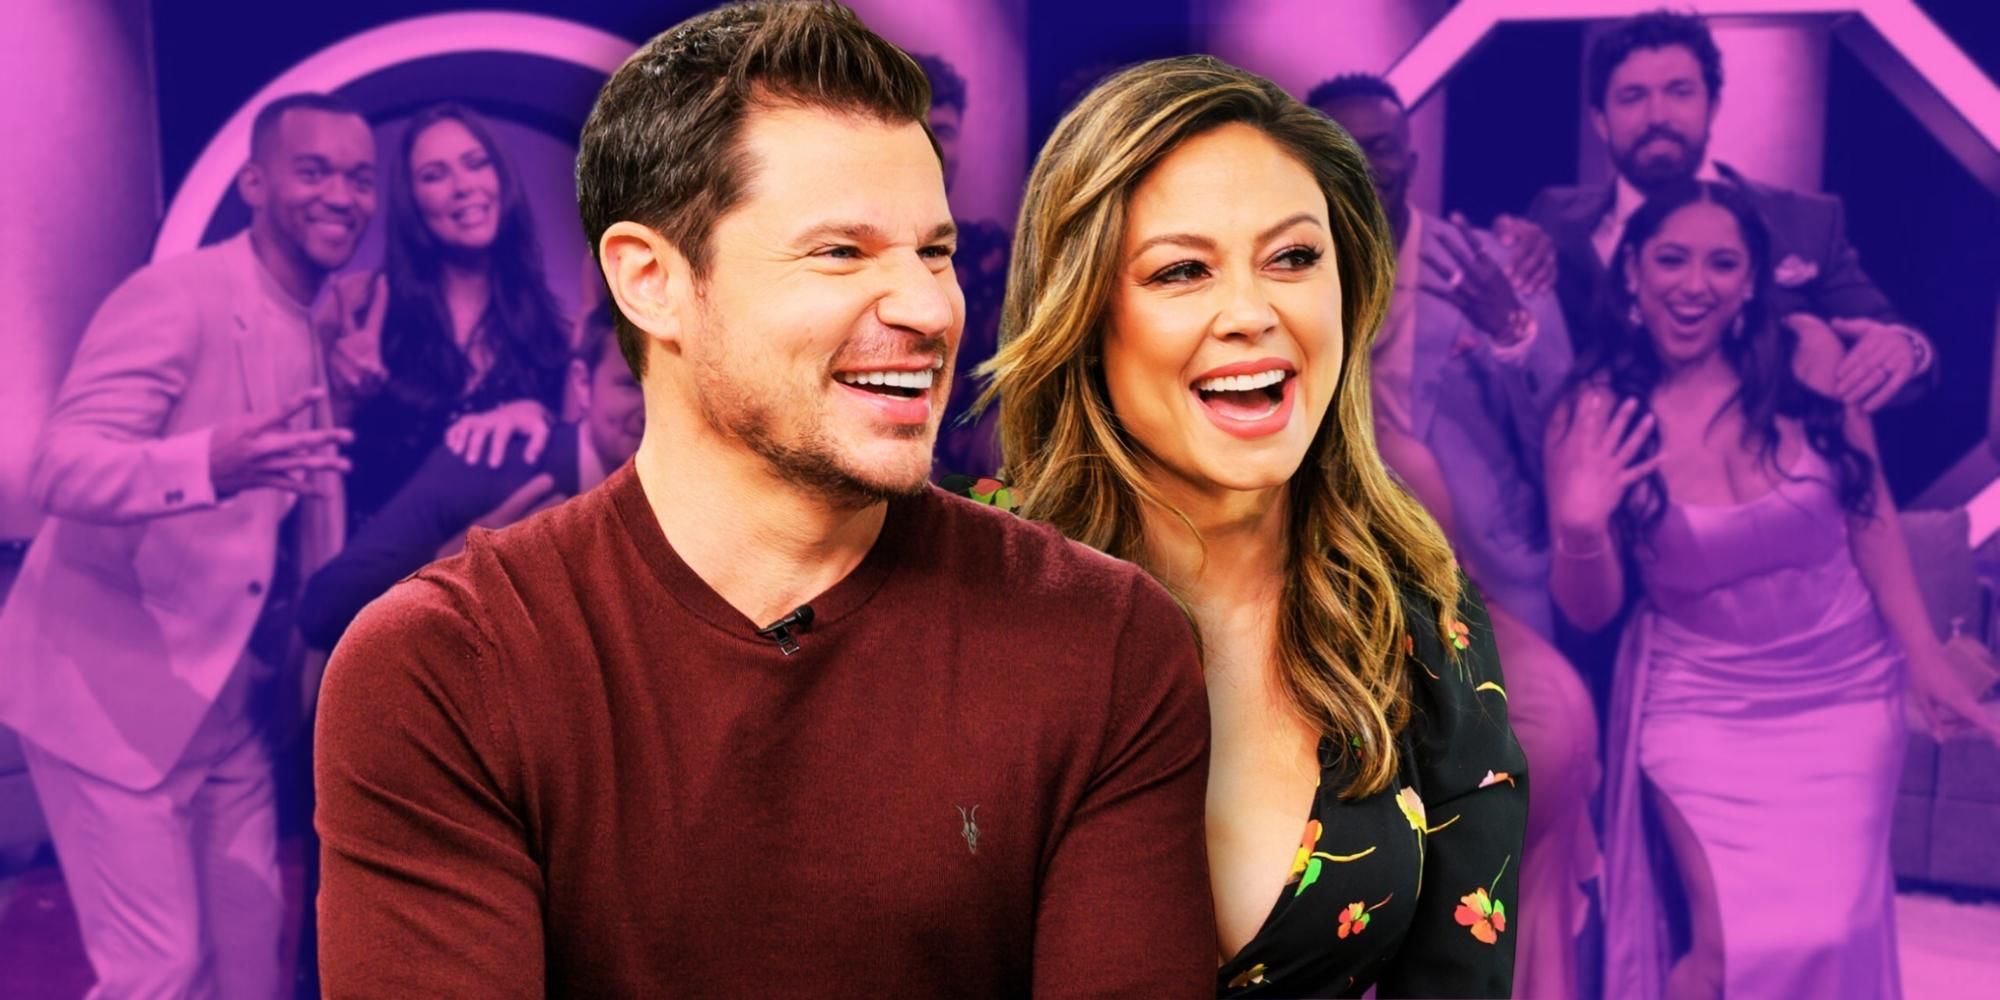 Nick Lachey on Hosting Netflix's 'Perfect Match' Without Wife Vanessa